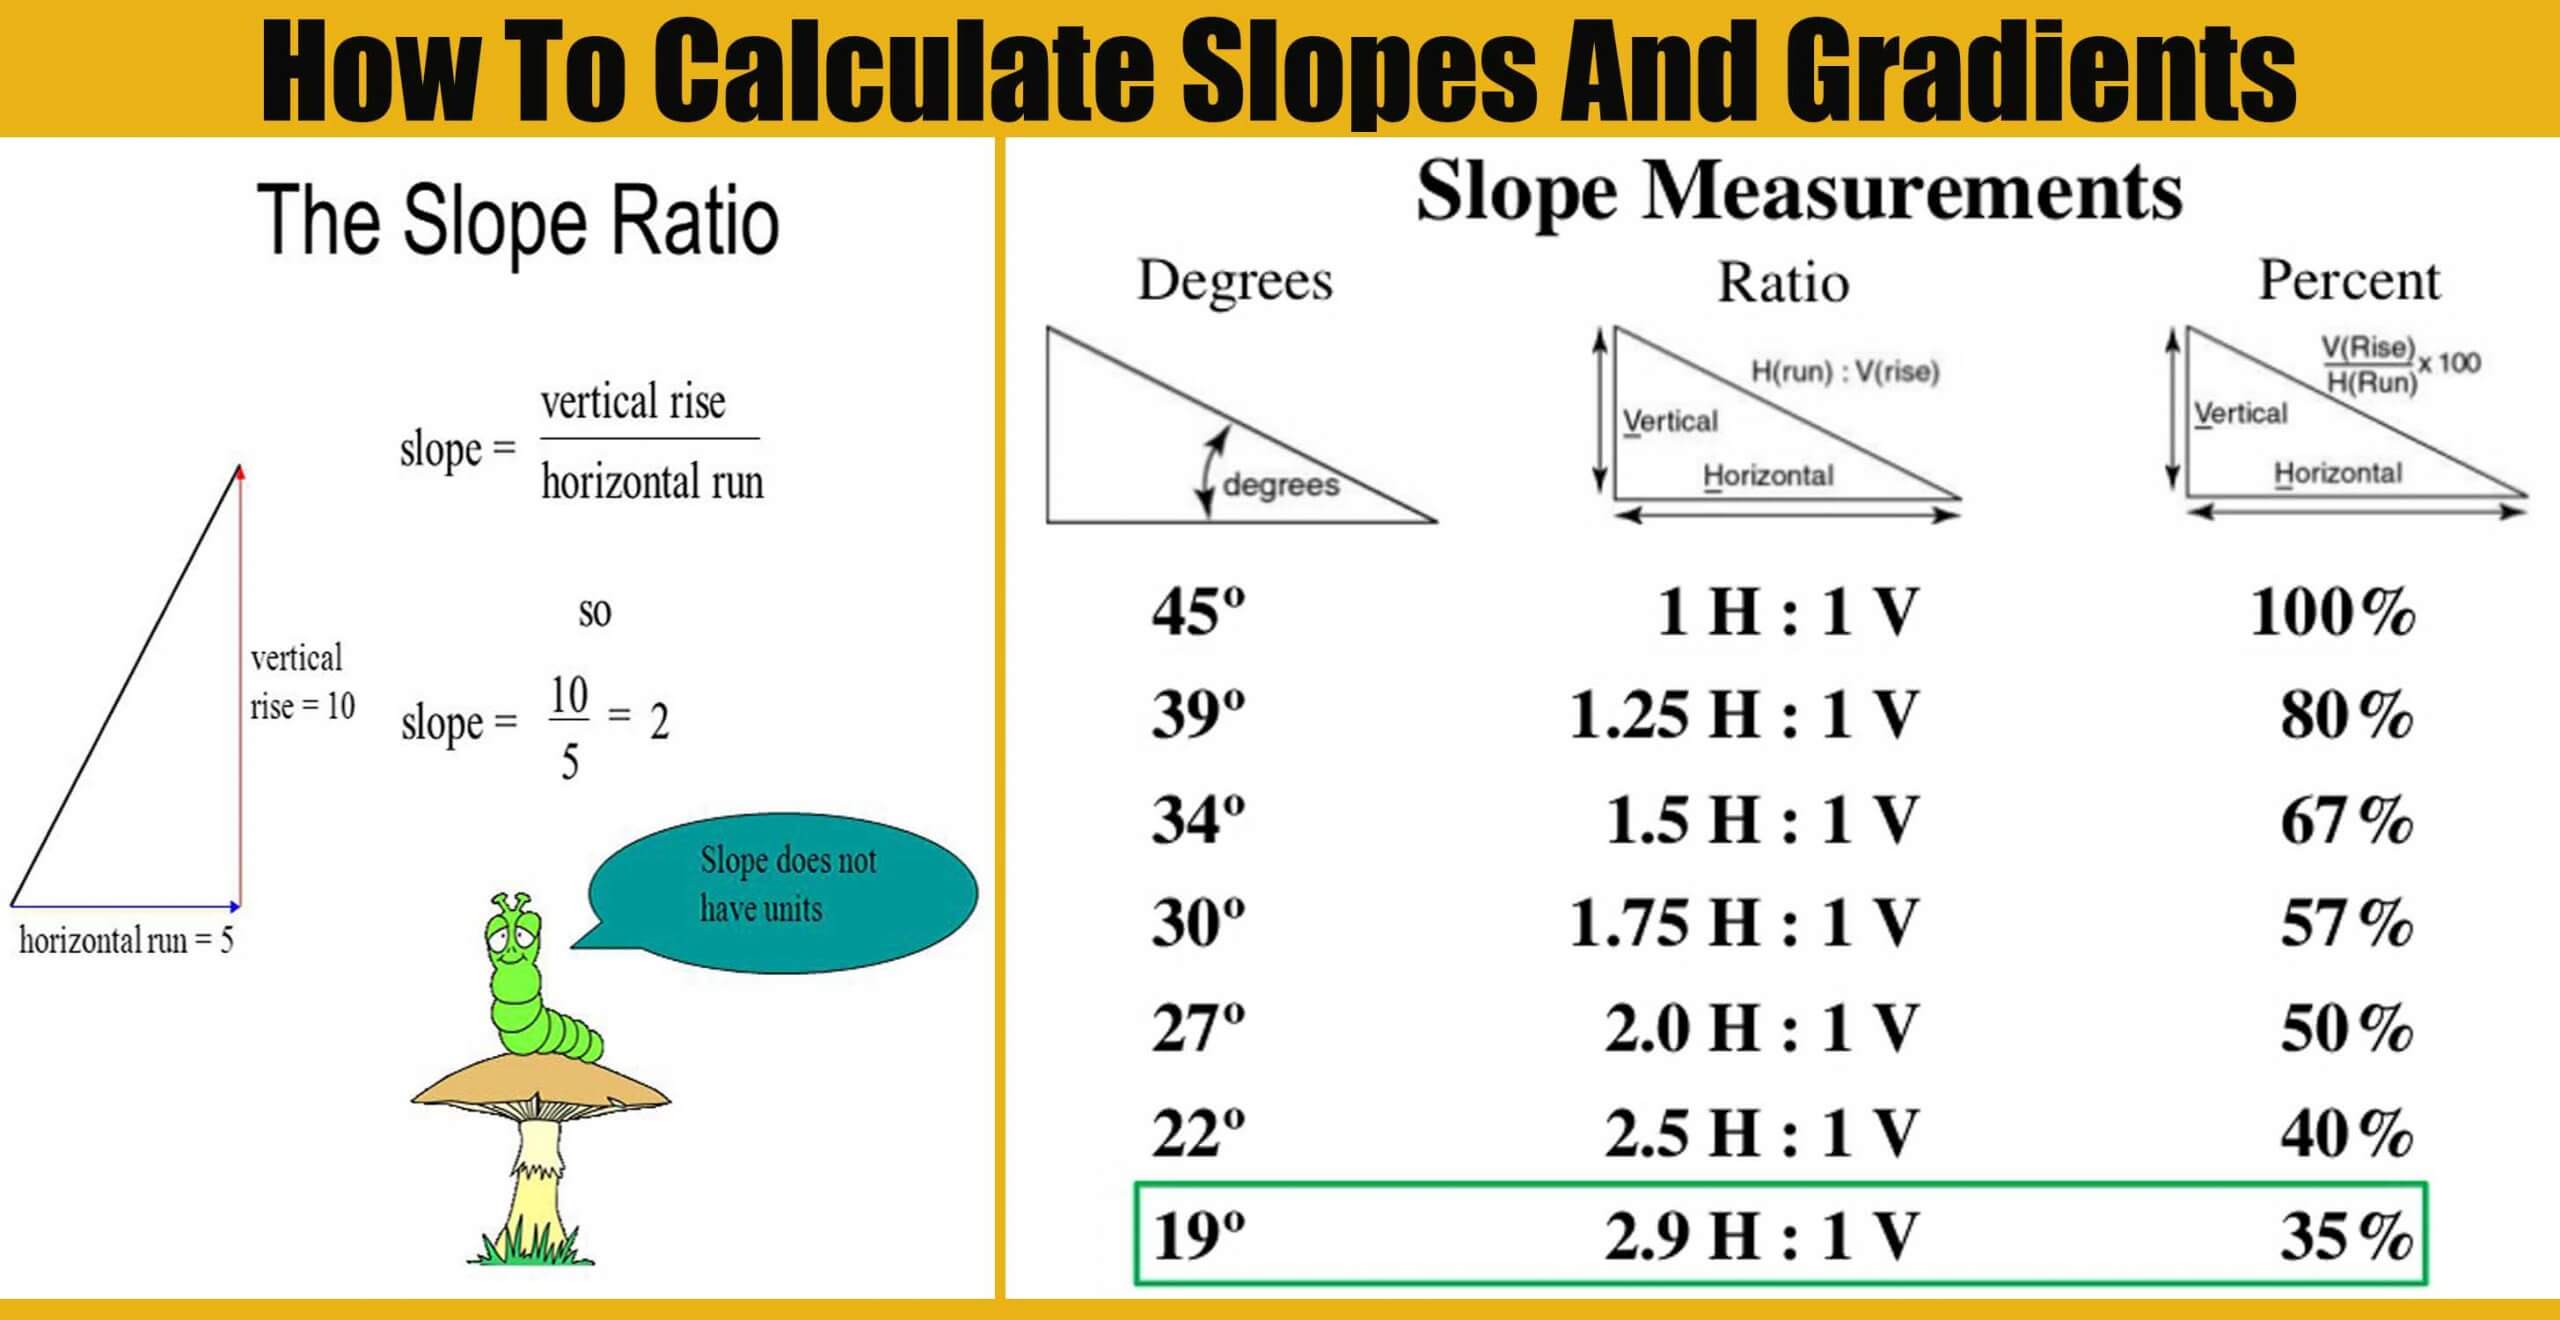 How To Calculate Slopes And Gradients - Engineering Discoveries